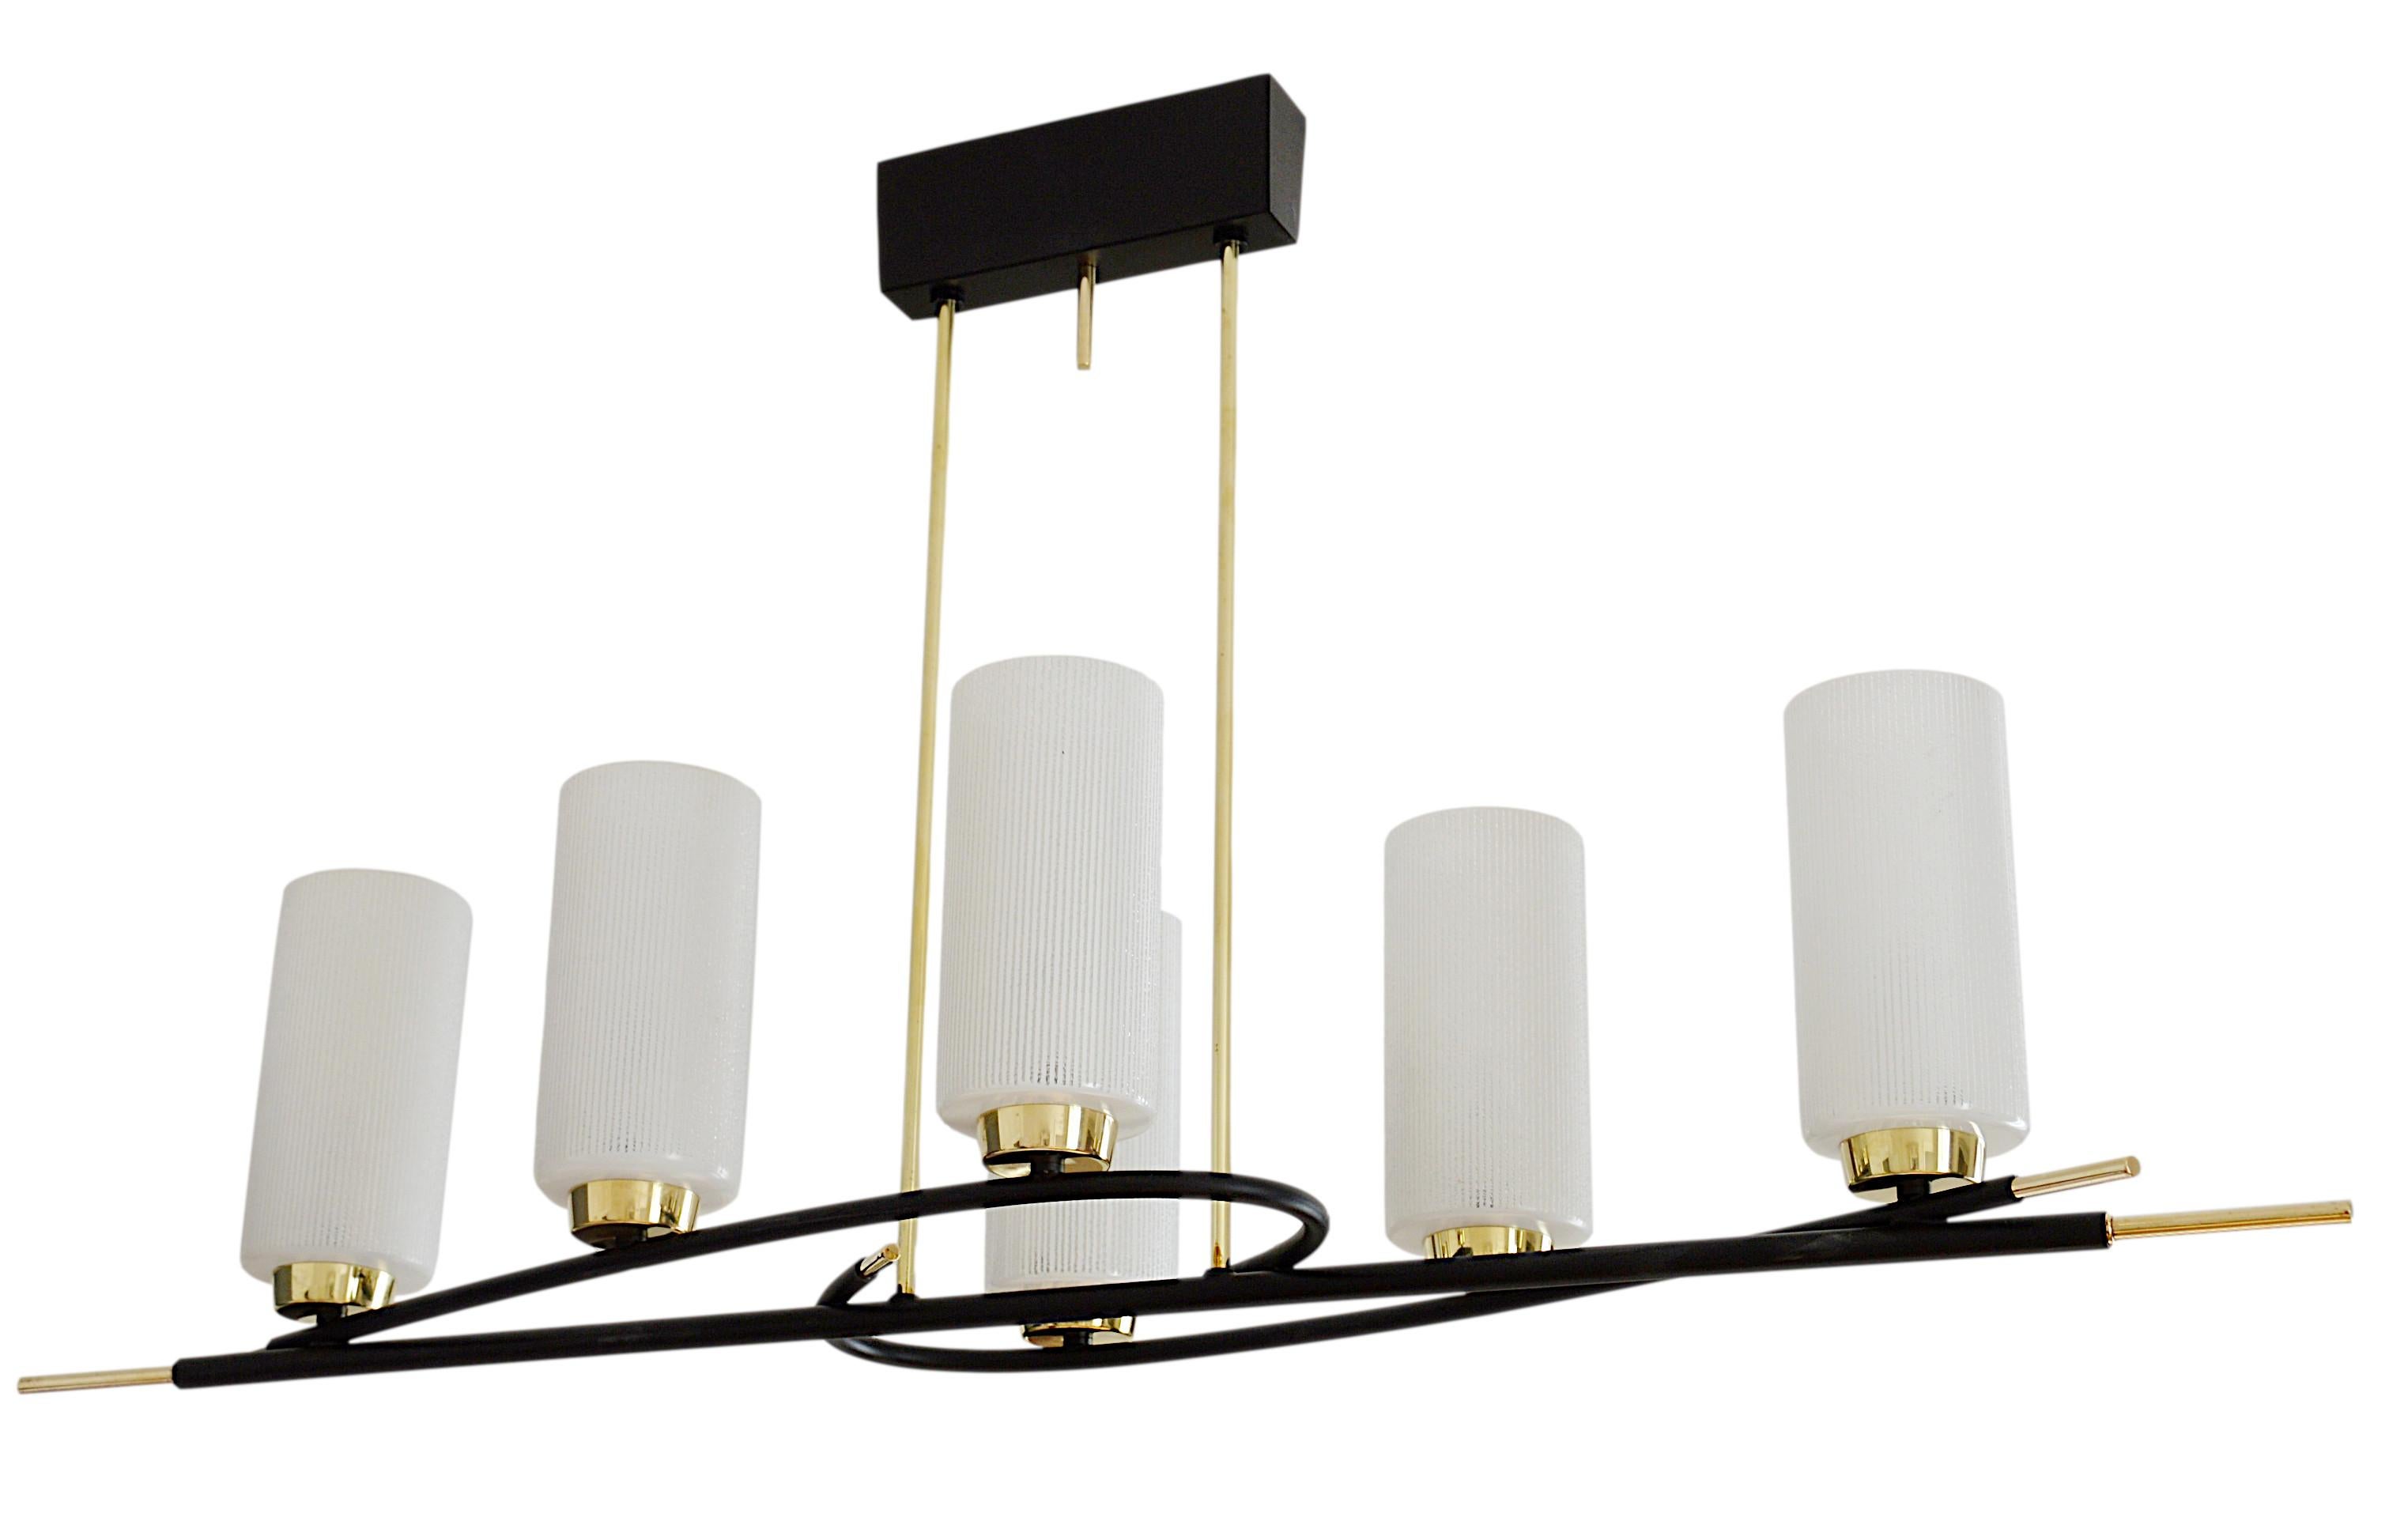 French mid-century chandelier by Arlus (Paris), France, 1950s. Same period as Lunel and Stilnovo. 6 light version. Original cylindrical shades. on their metal and brass fixture. Original shades are rare of these Arlus chandeliers. They often have